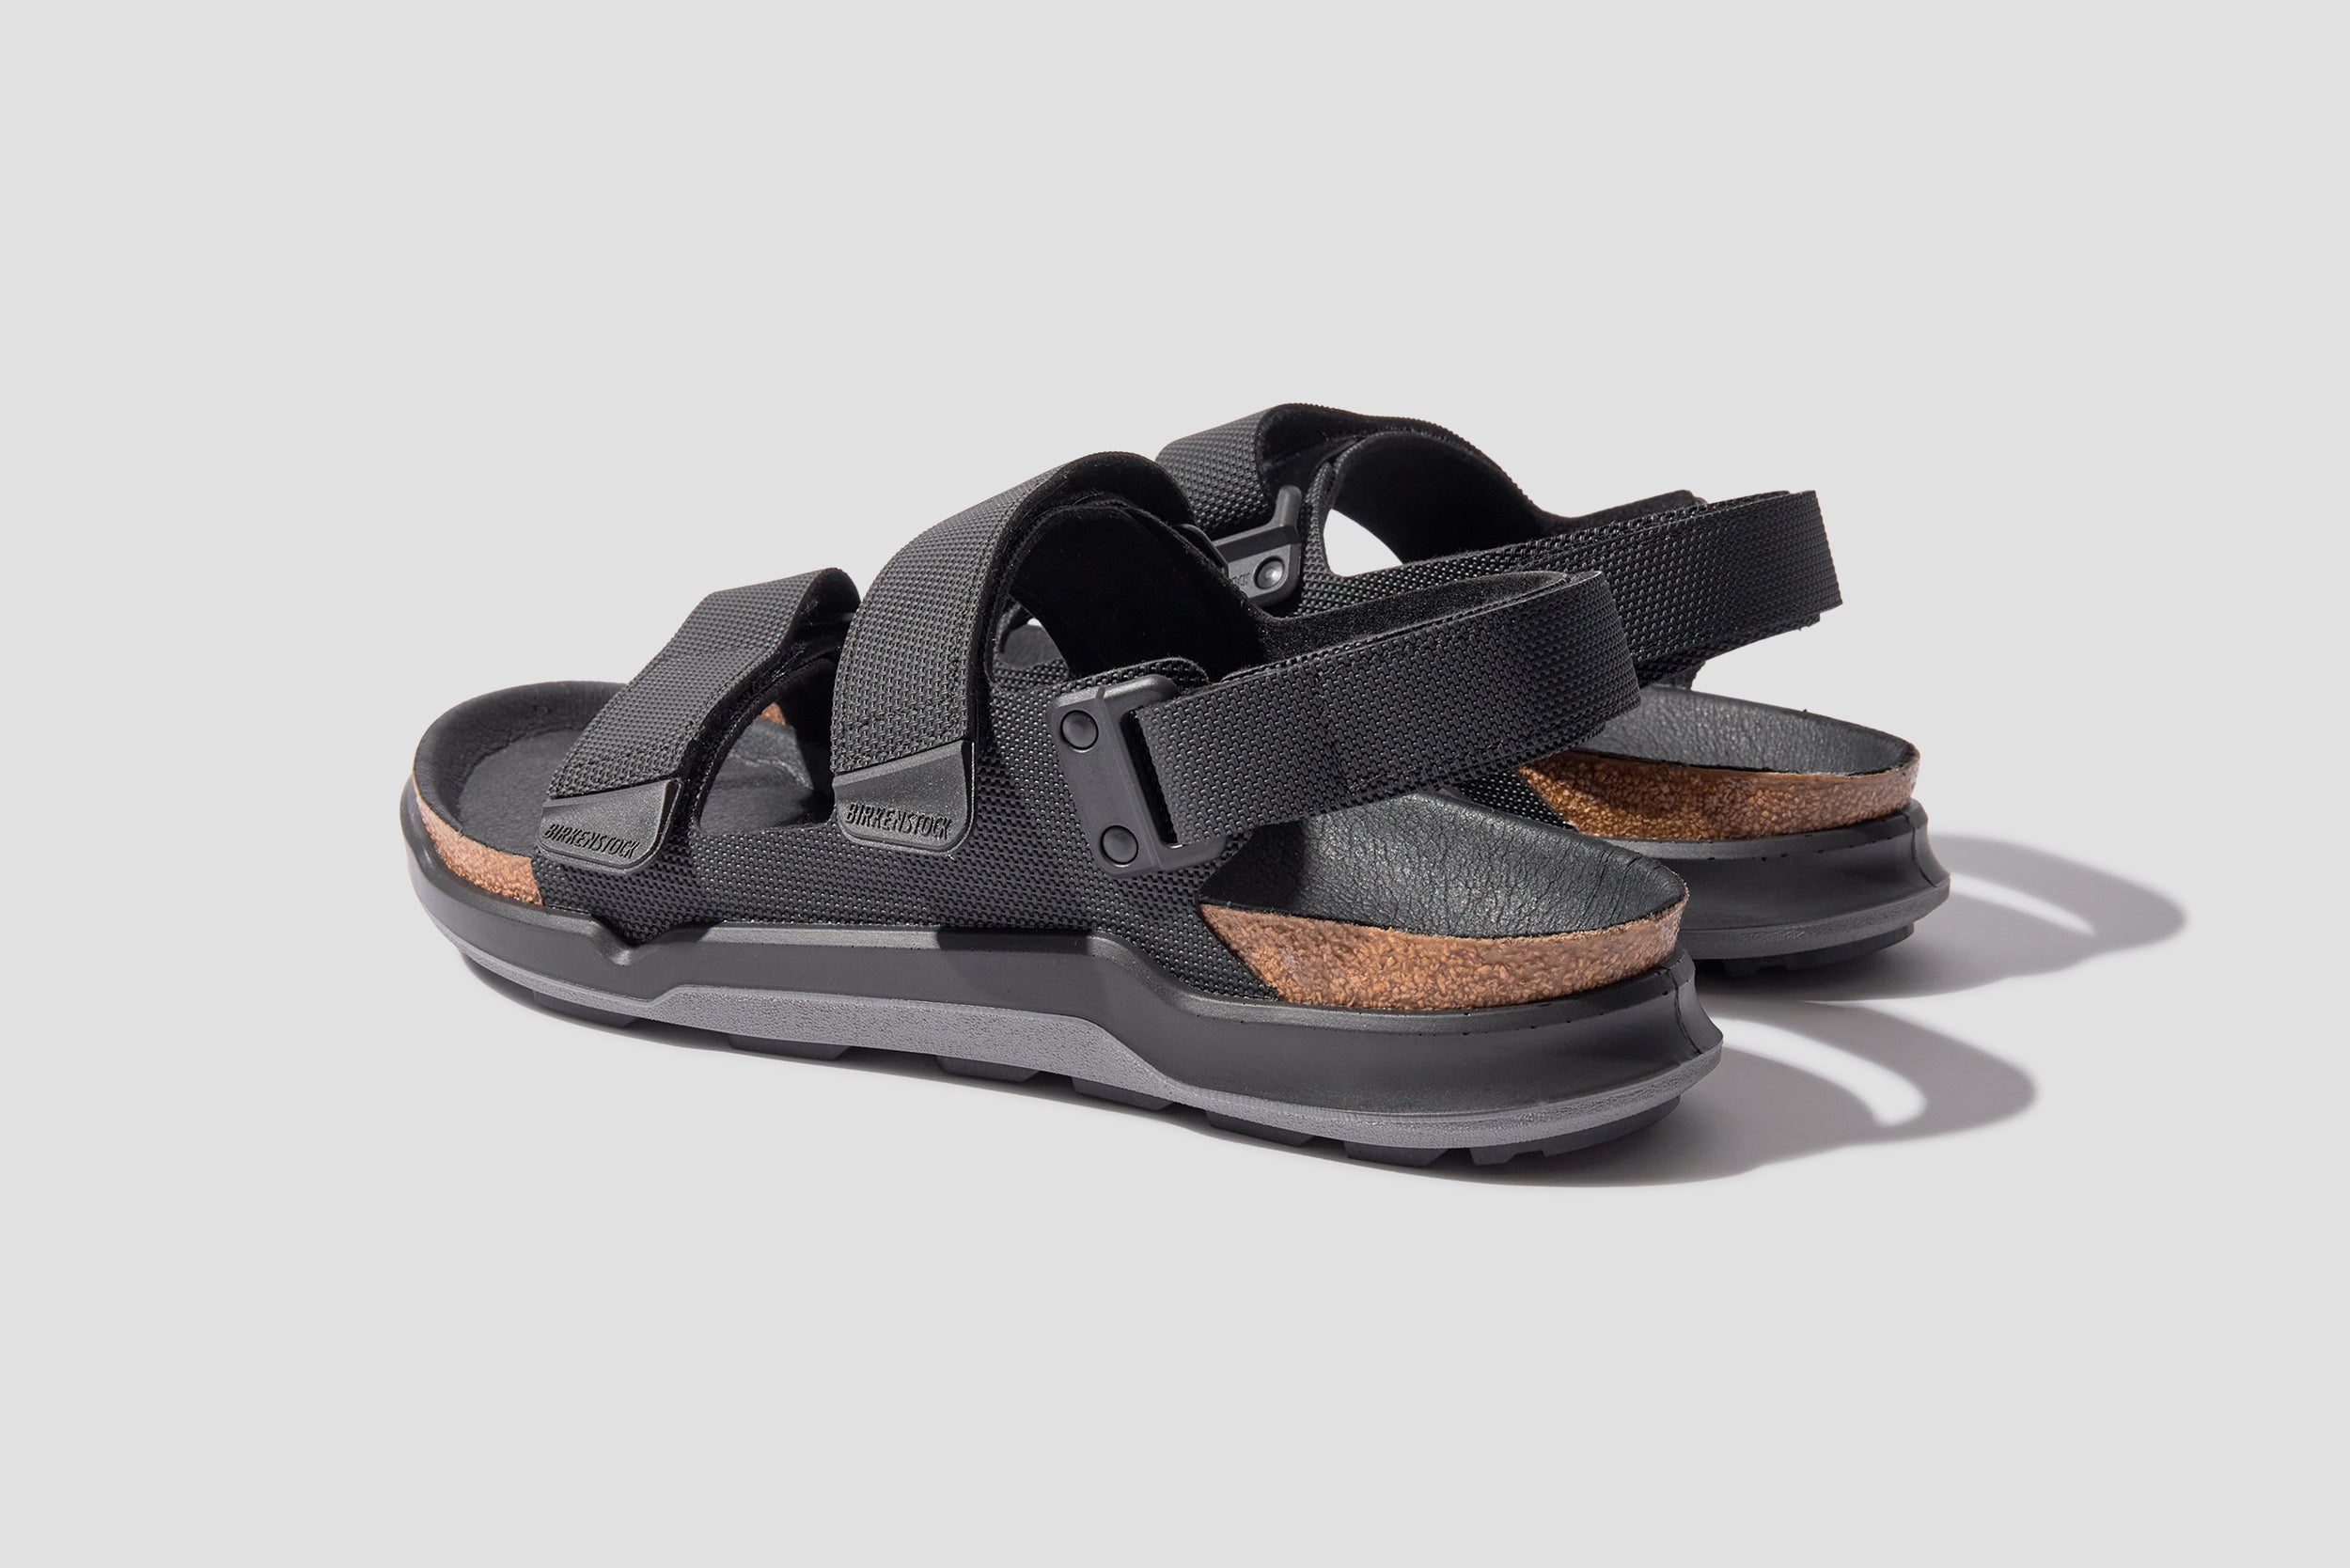 Black Leather Birkenstock Sandals With Double Belt Buckle | Buy Online At  The Best Price In Accra